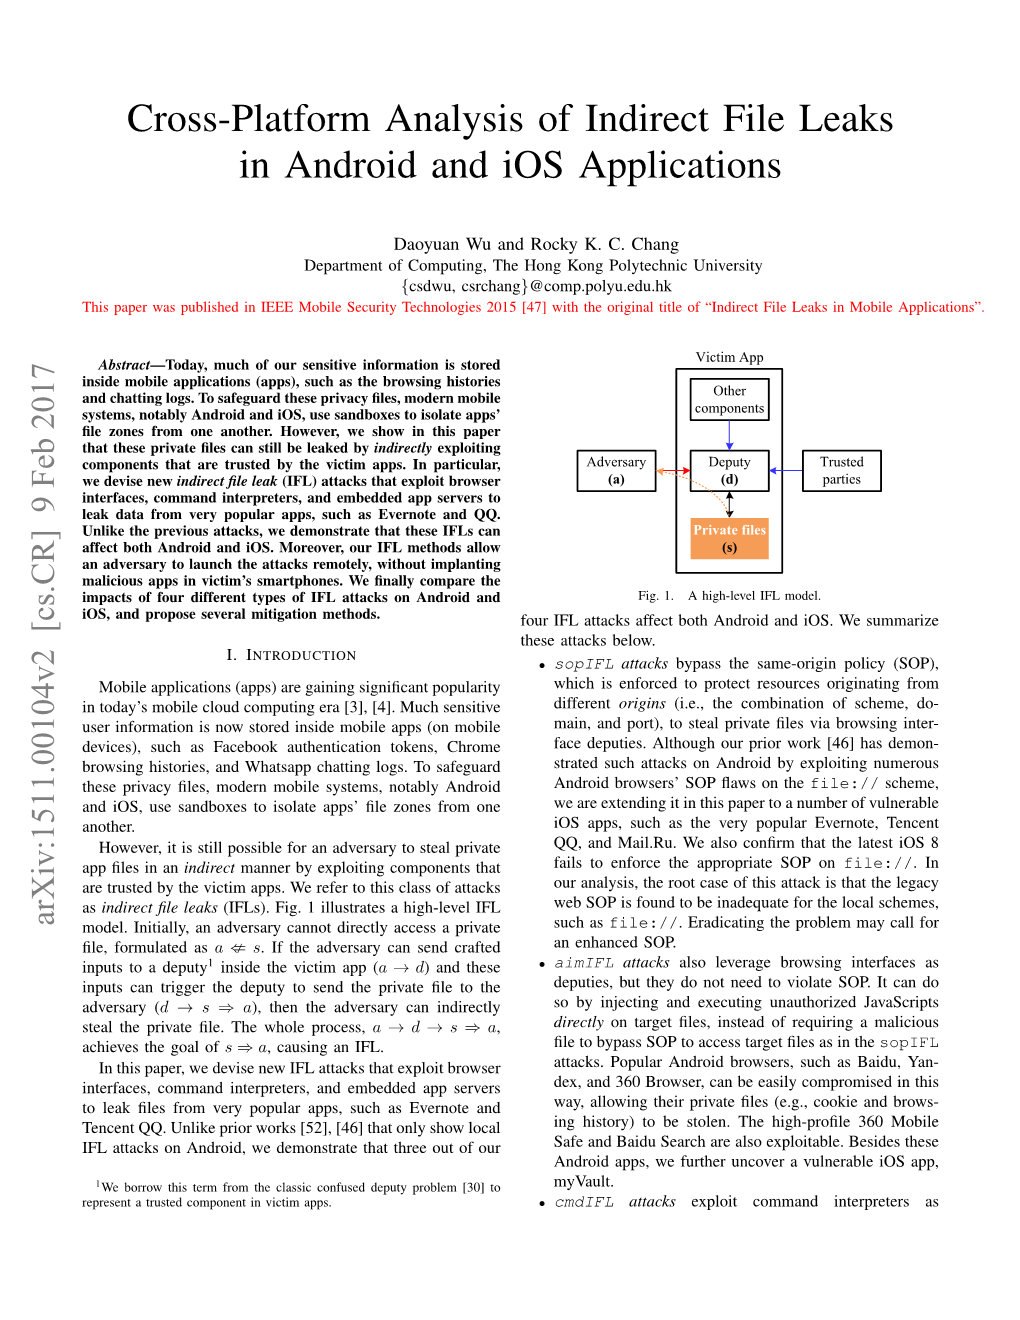 Cross-Platform Analysis of Indirect File Leaks in Android and Ios Applications